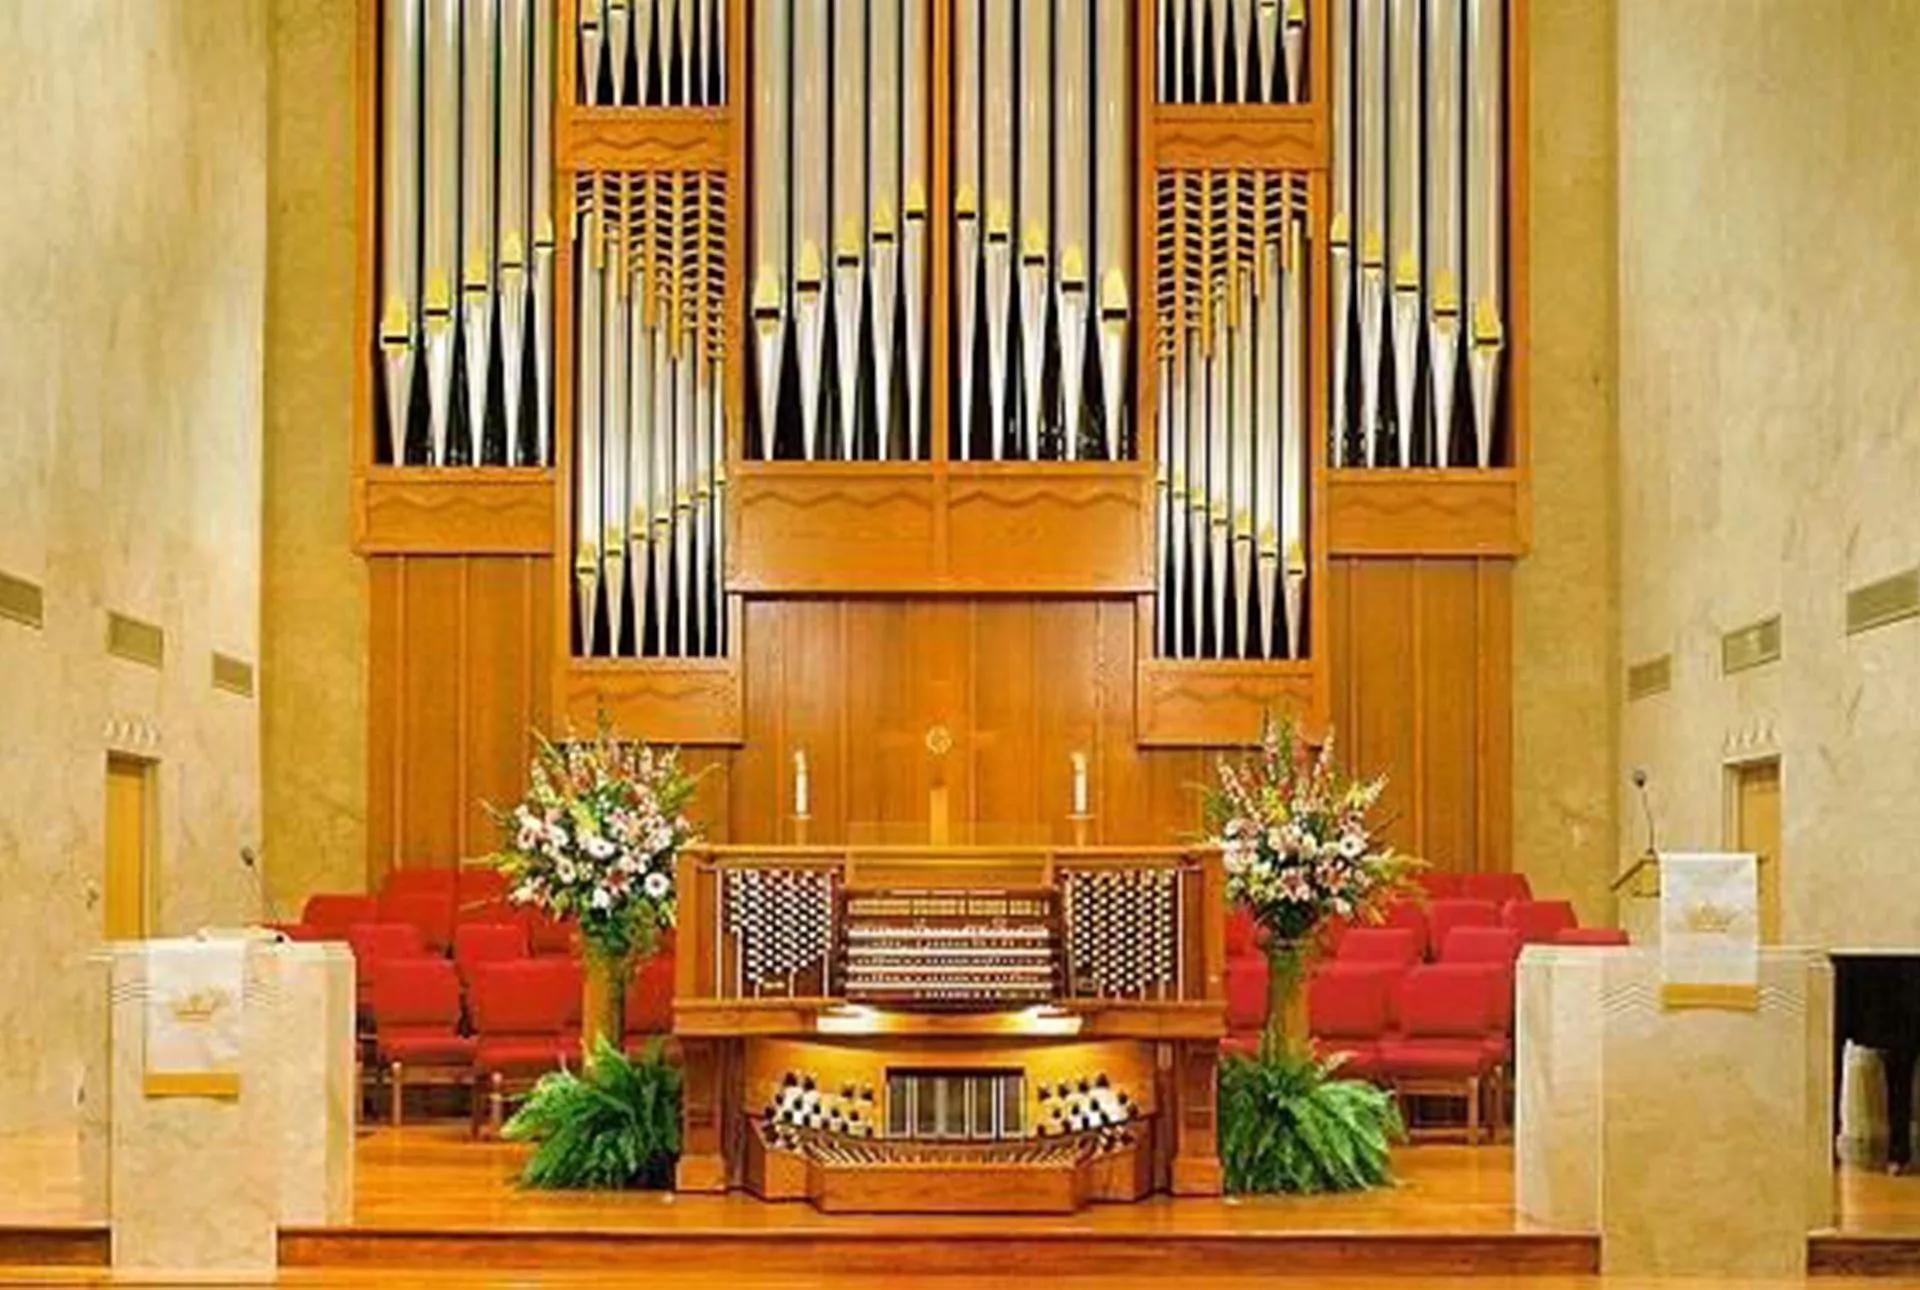 Moody Methodist Church alter and pulpit